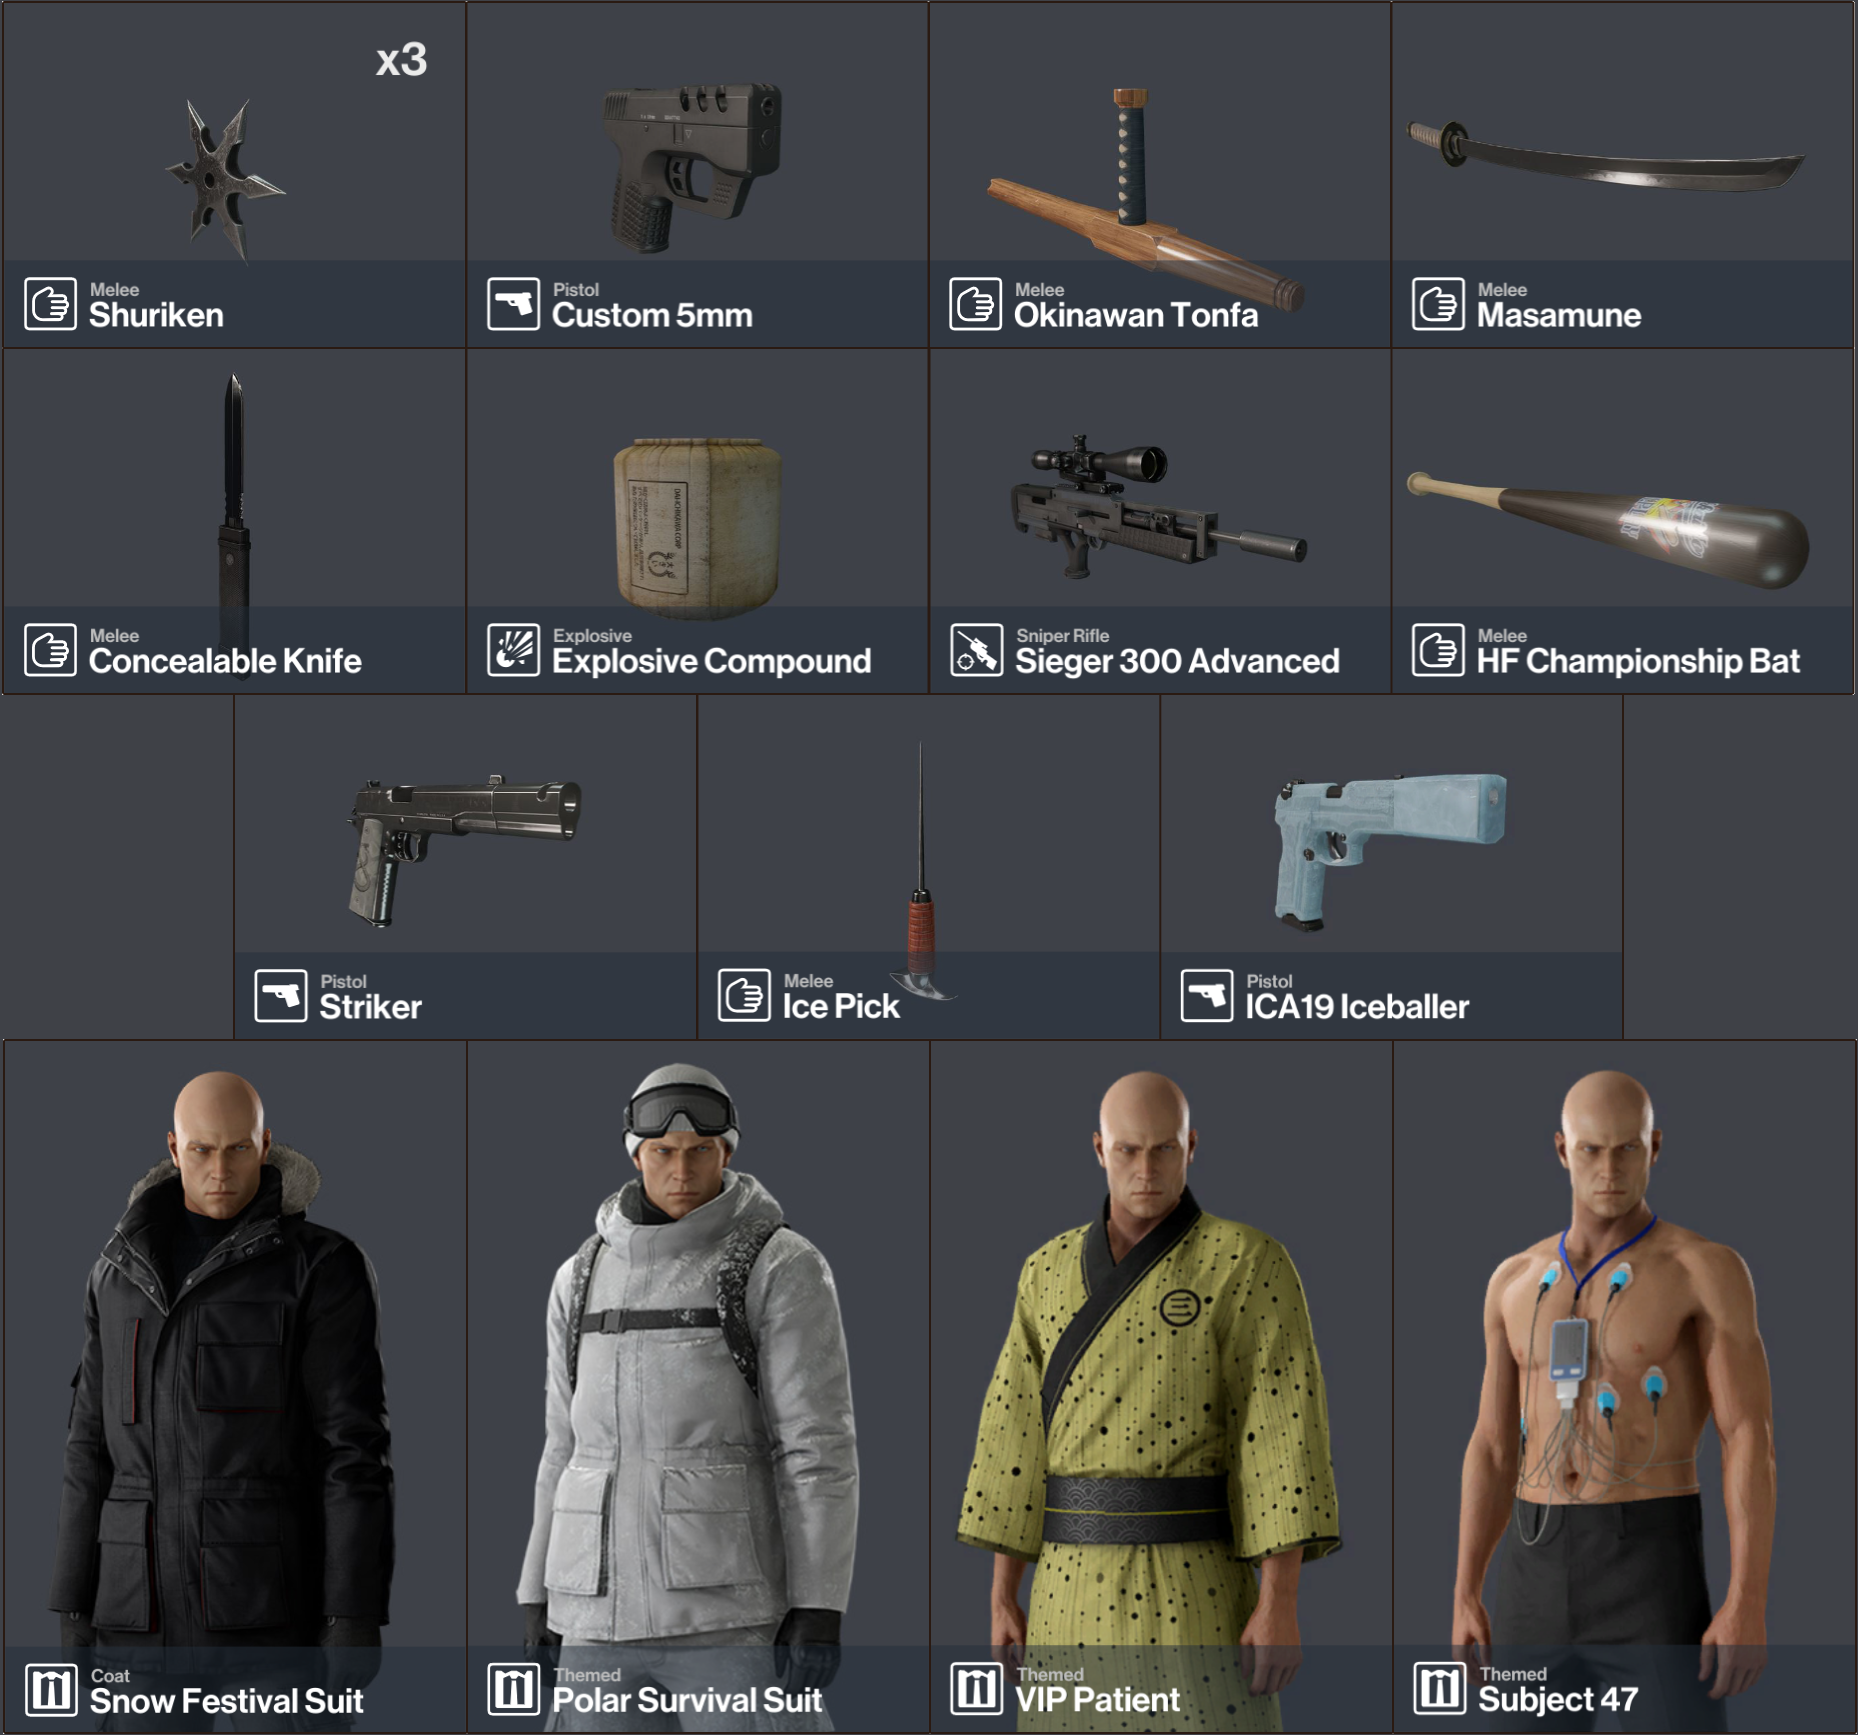 Hitman 3: Best Items, Gear, and Equipment